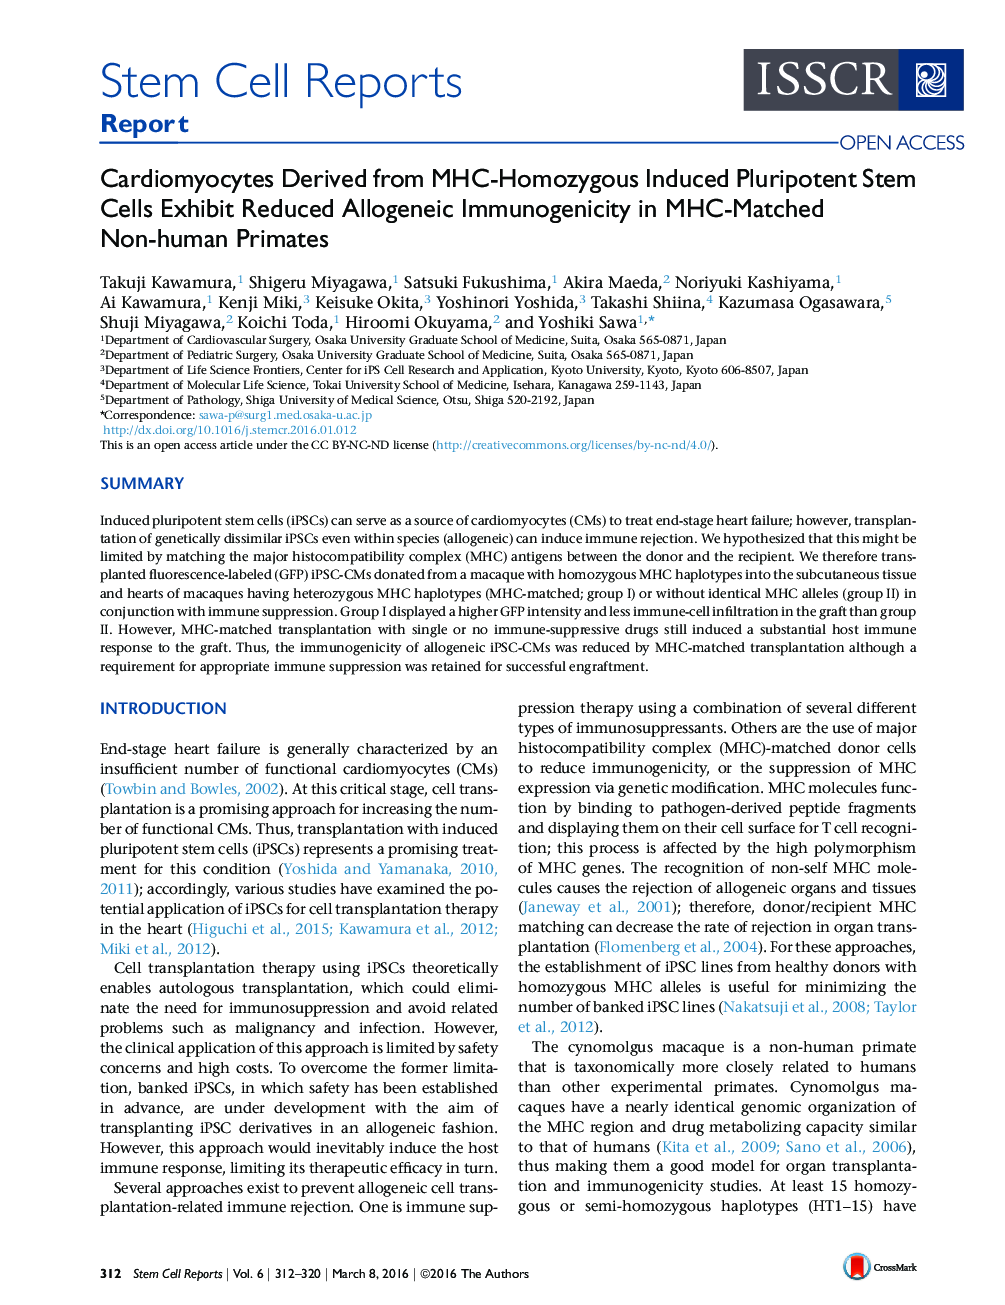 Cardiomyocytes Derived from MHC-Homozygous Induced Pluripotent Stem Cells Exhibit Reduced Allogeneic Immunogenicity in MHC-Matched Non-human Primates 